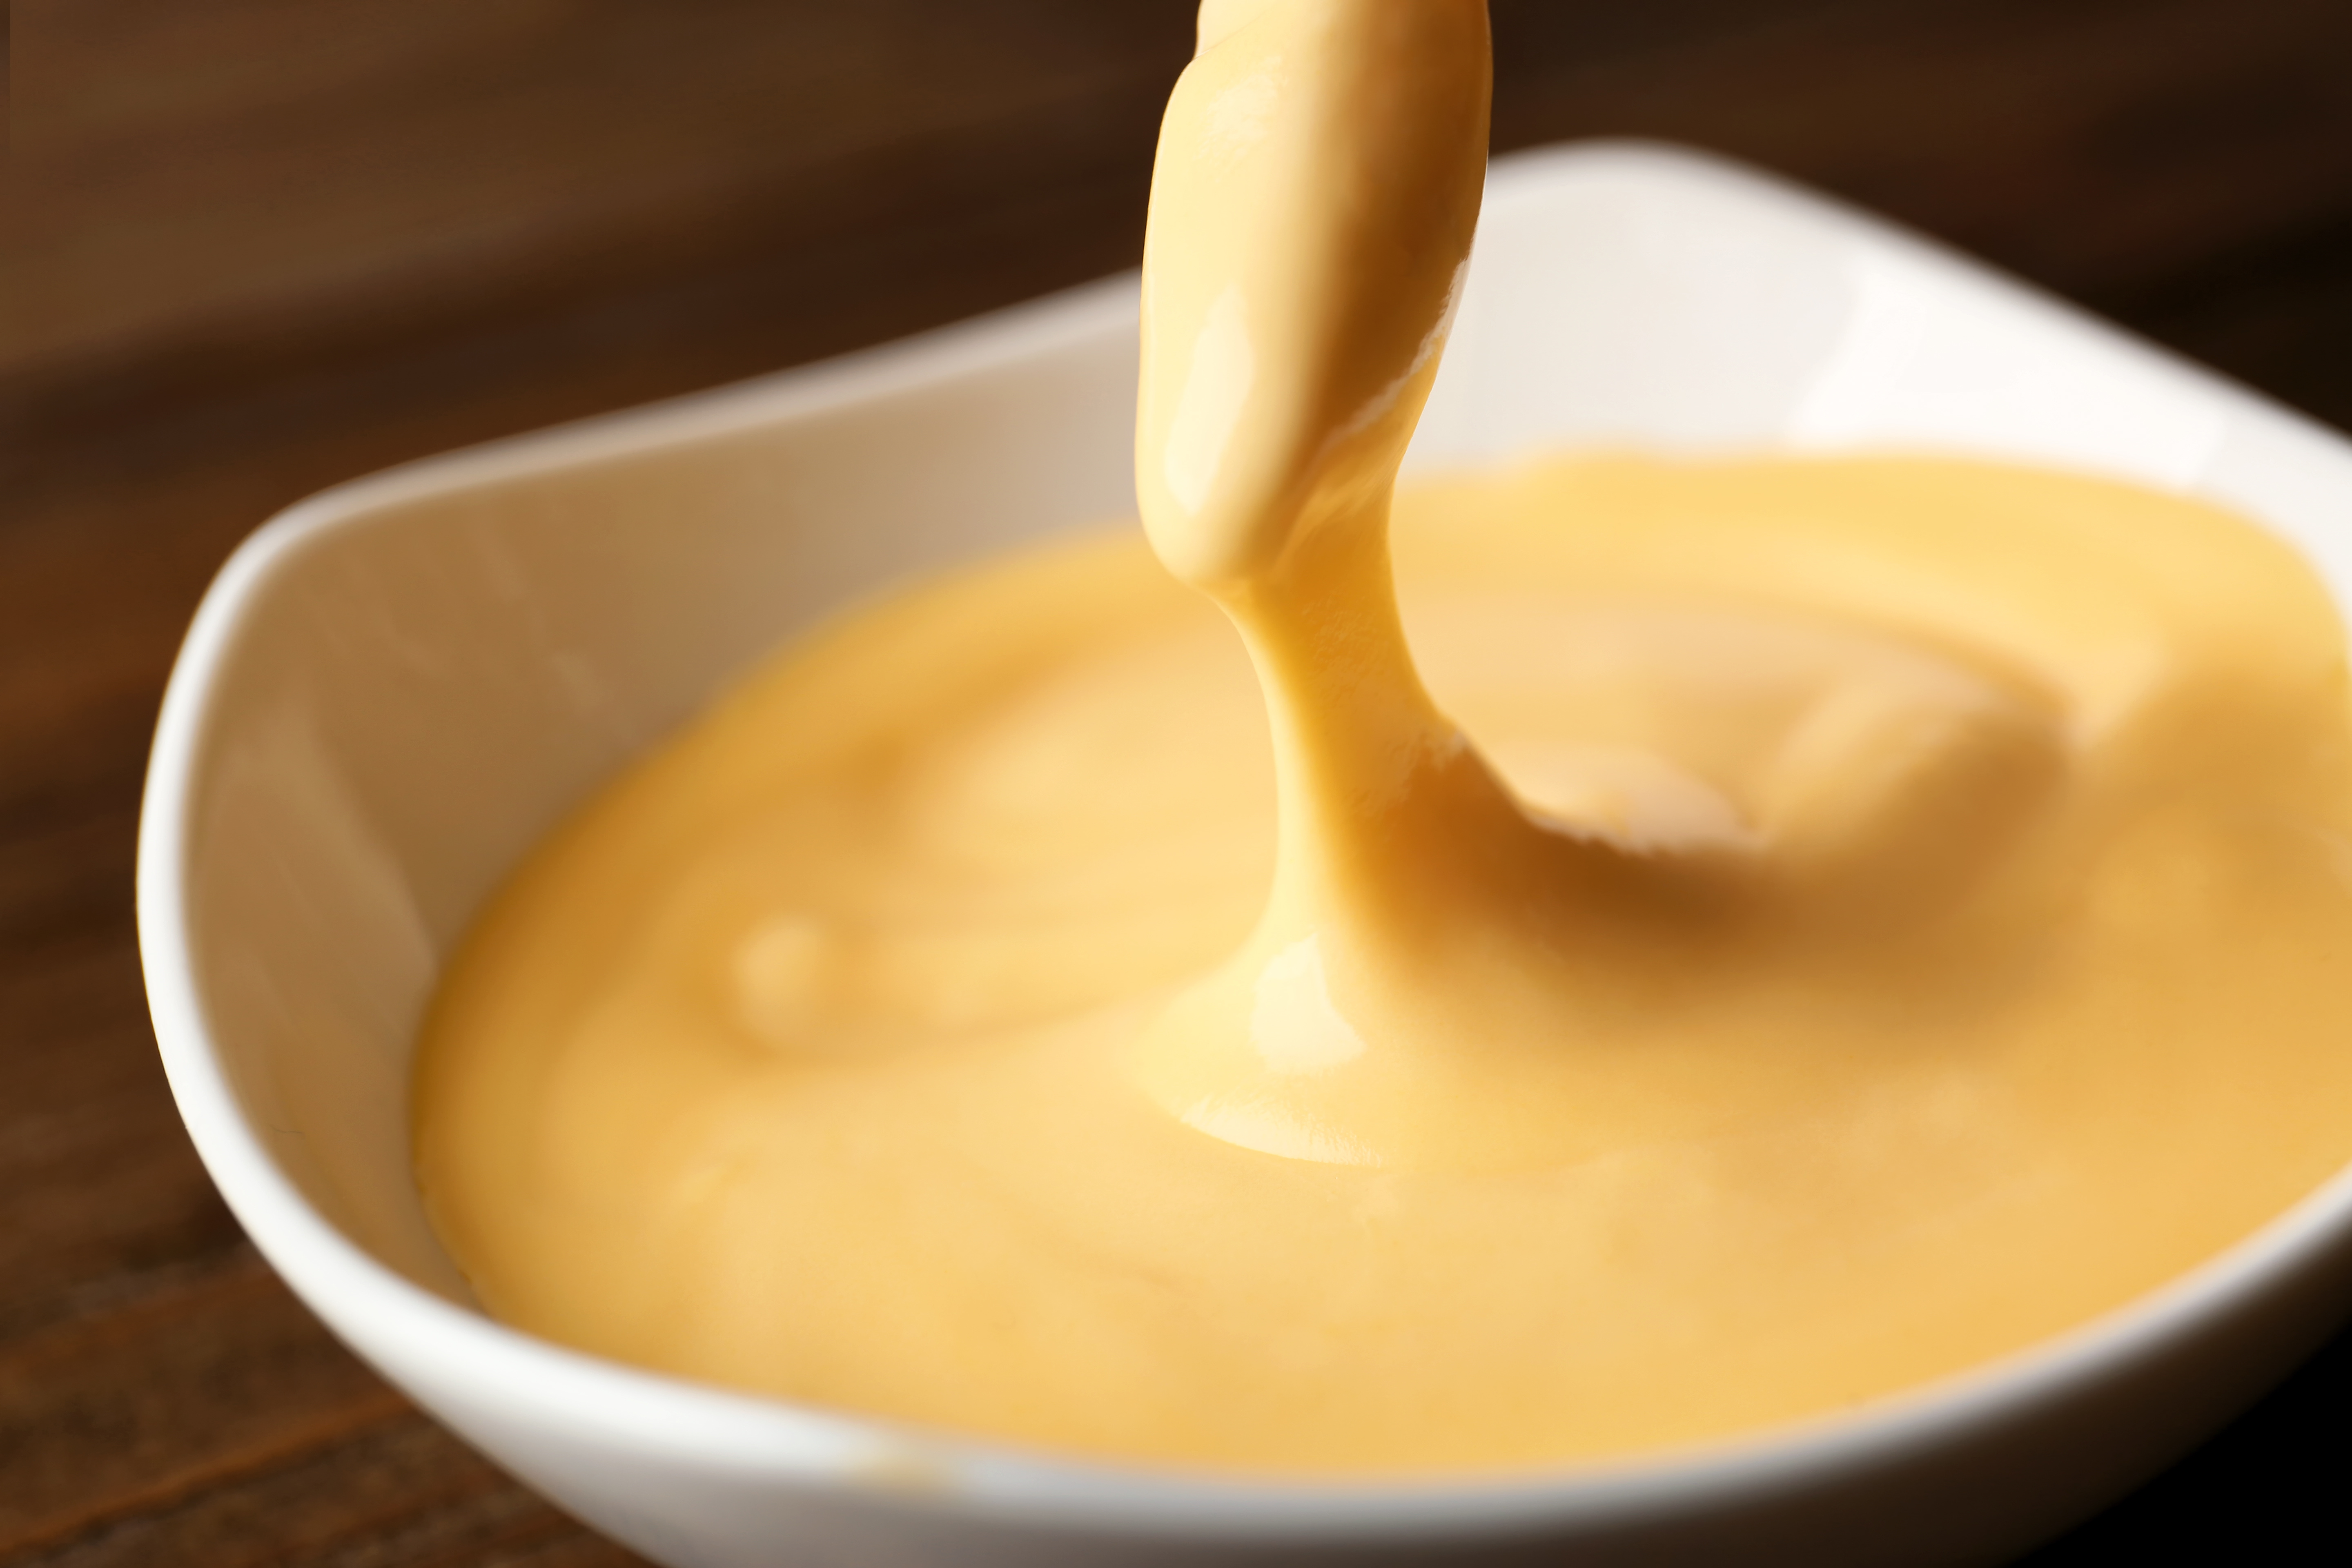 Cheese sauce in a bowl